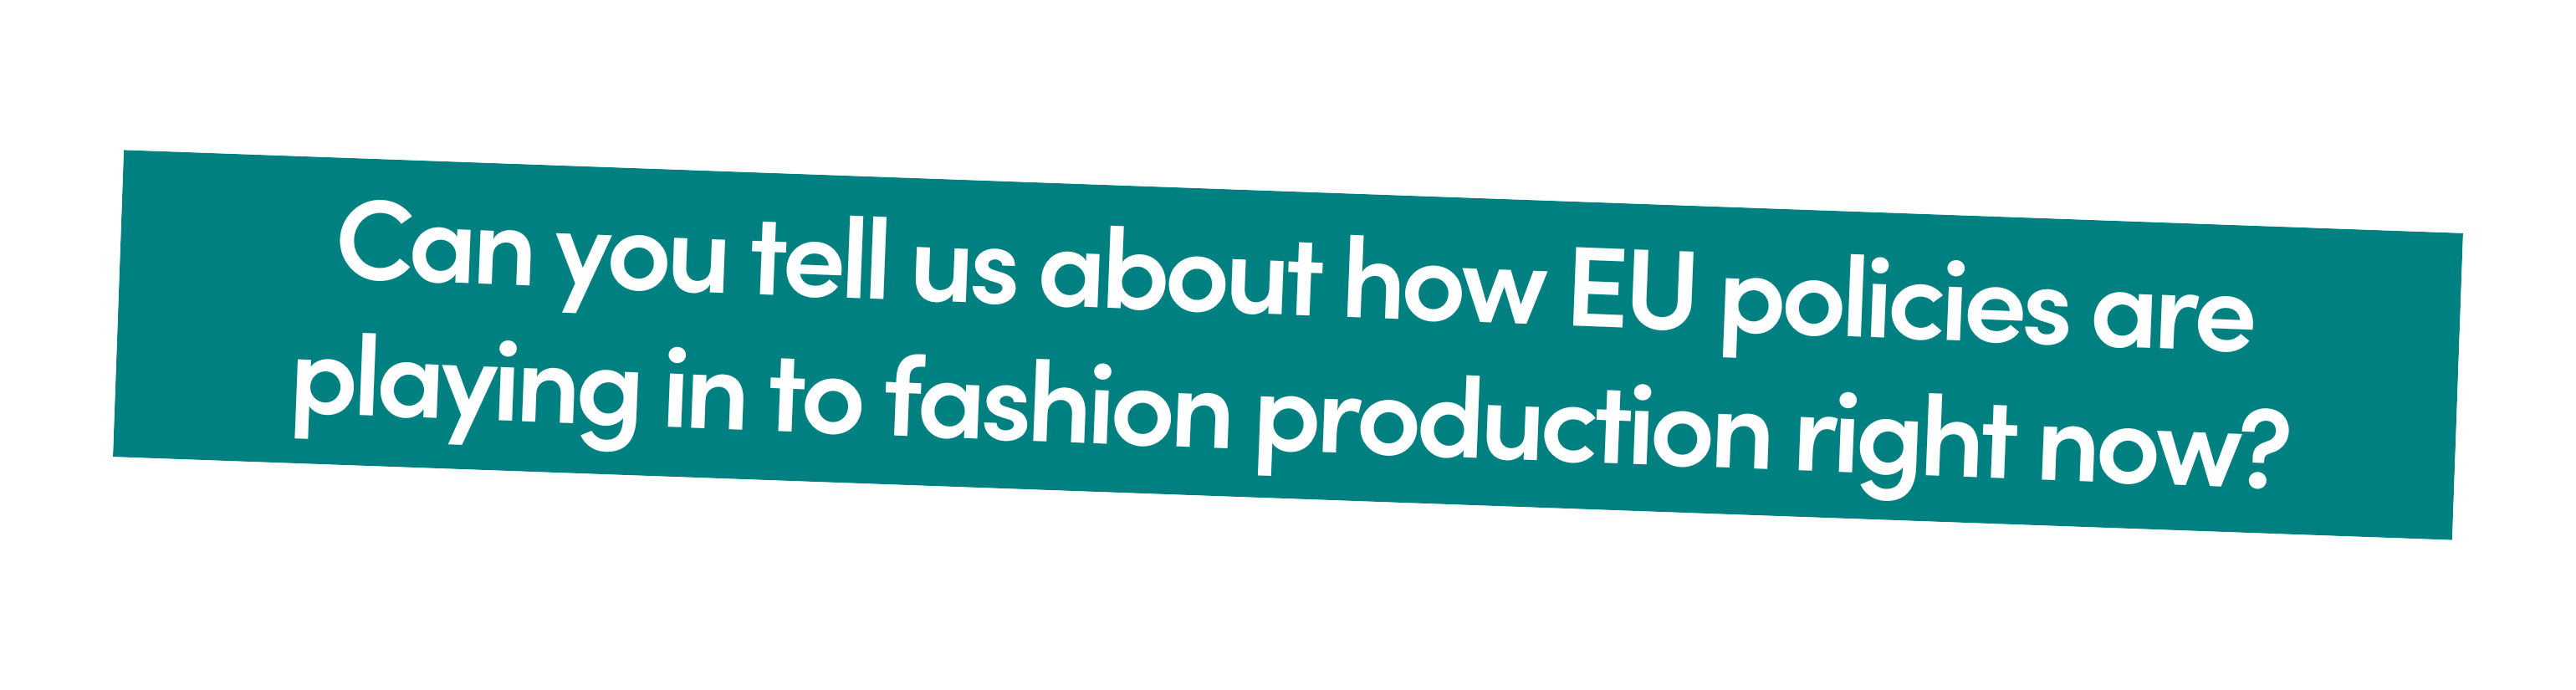 Can you tell us about how EU policies are playing in to fashion production right now?